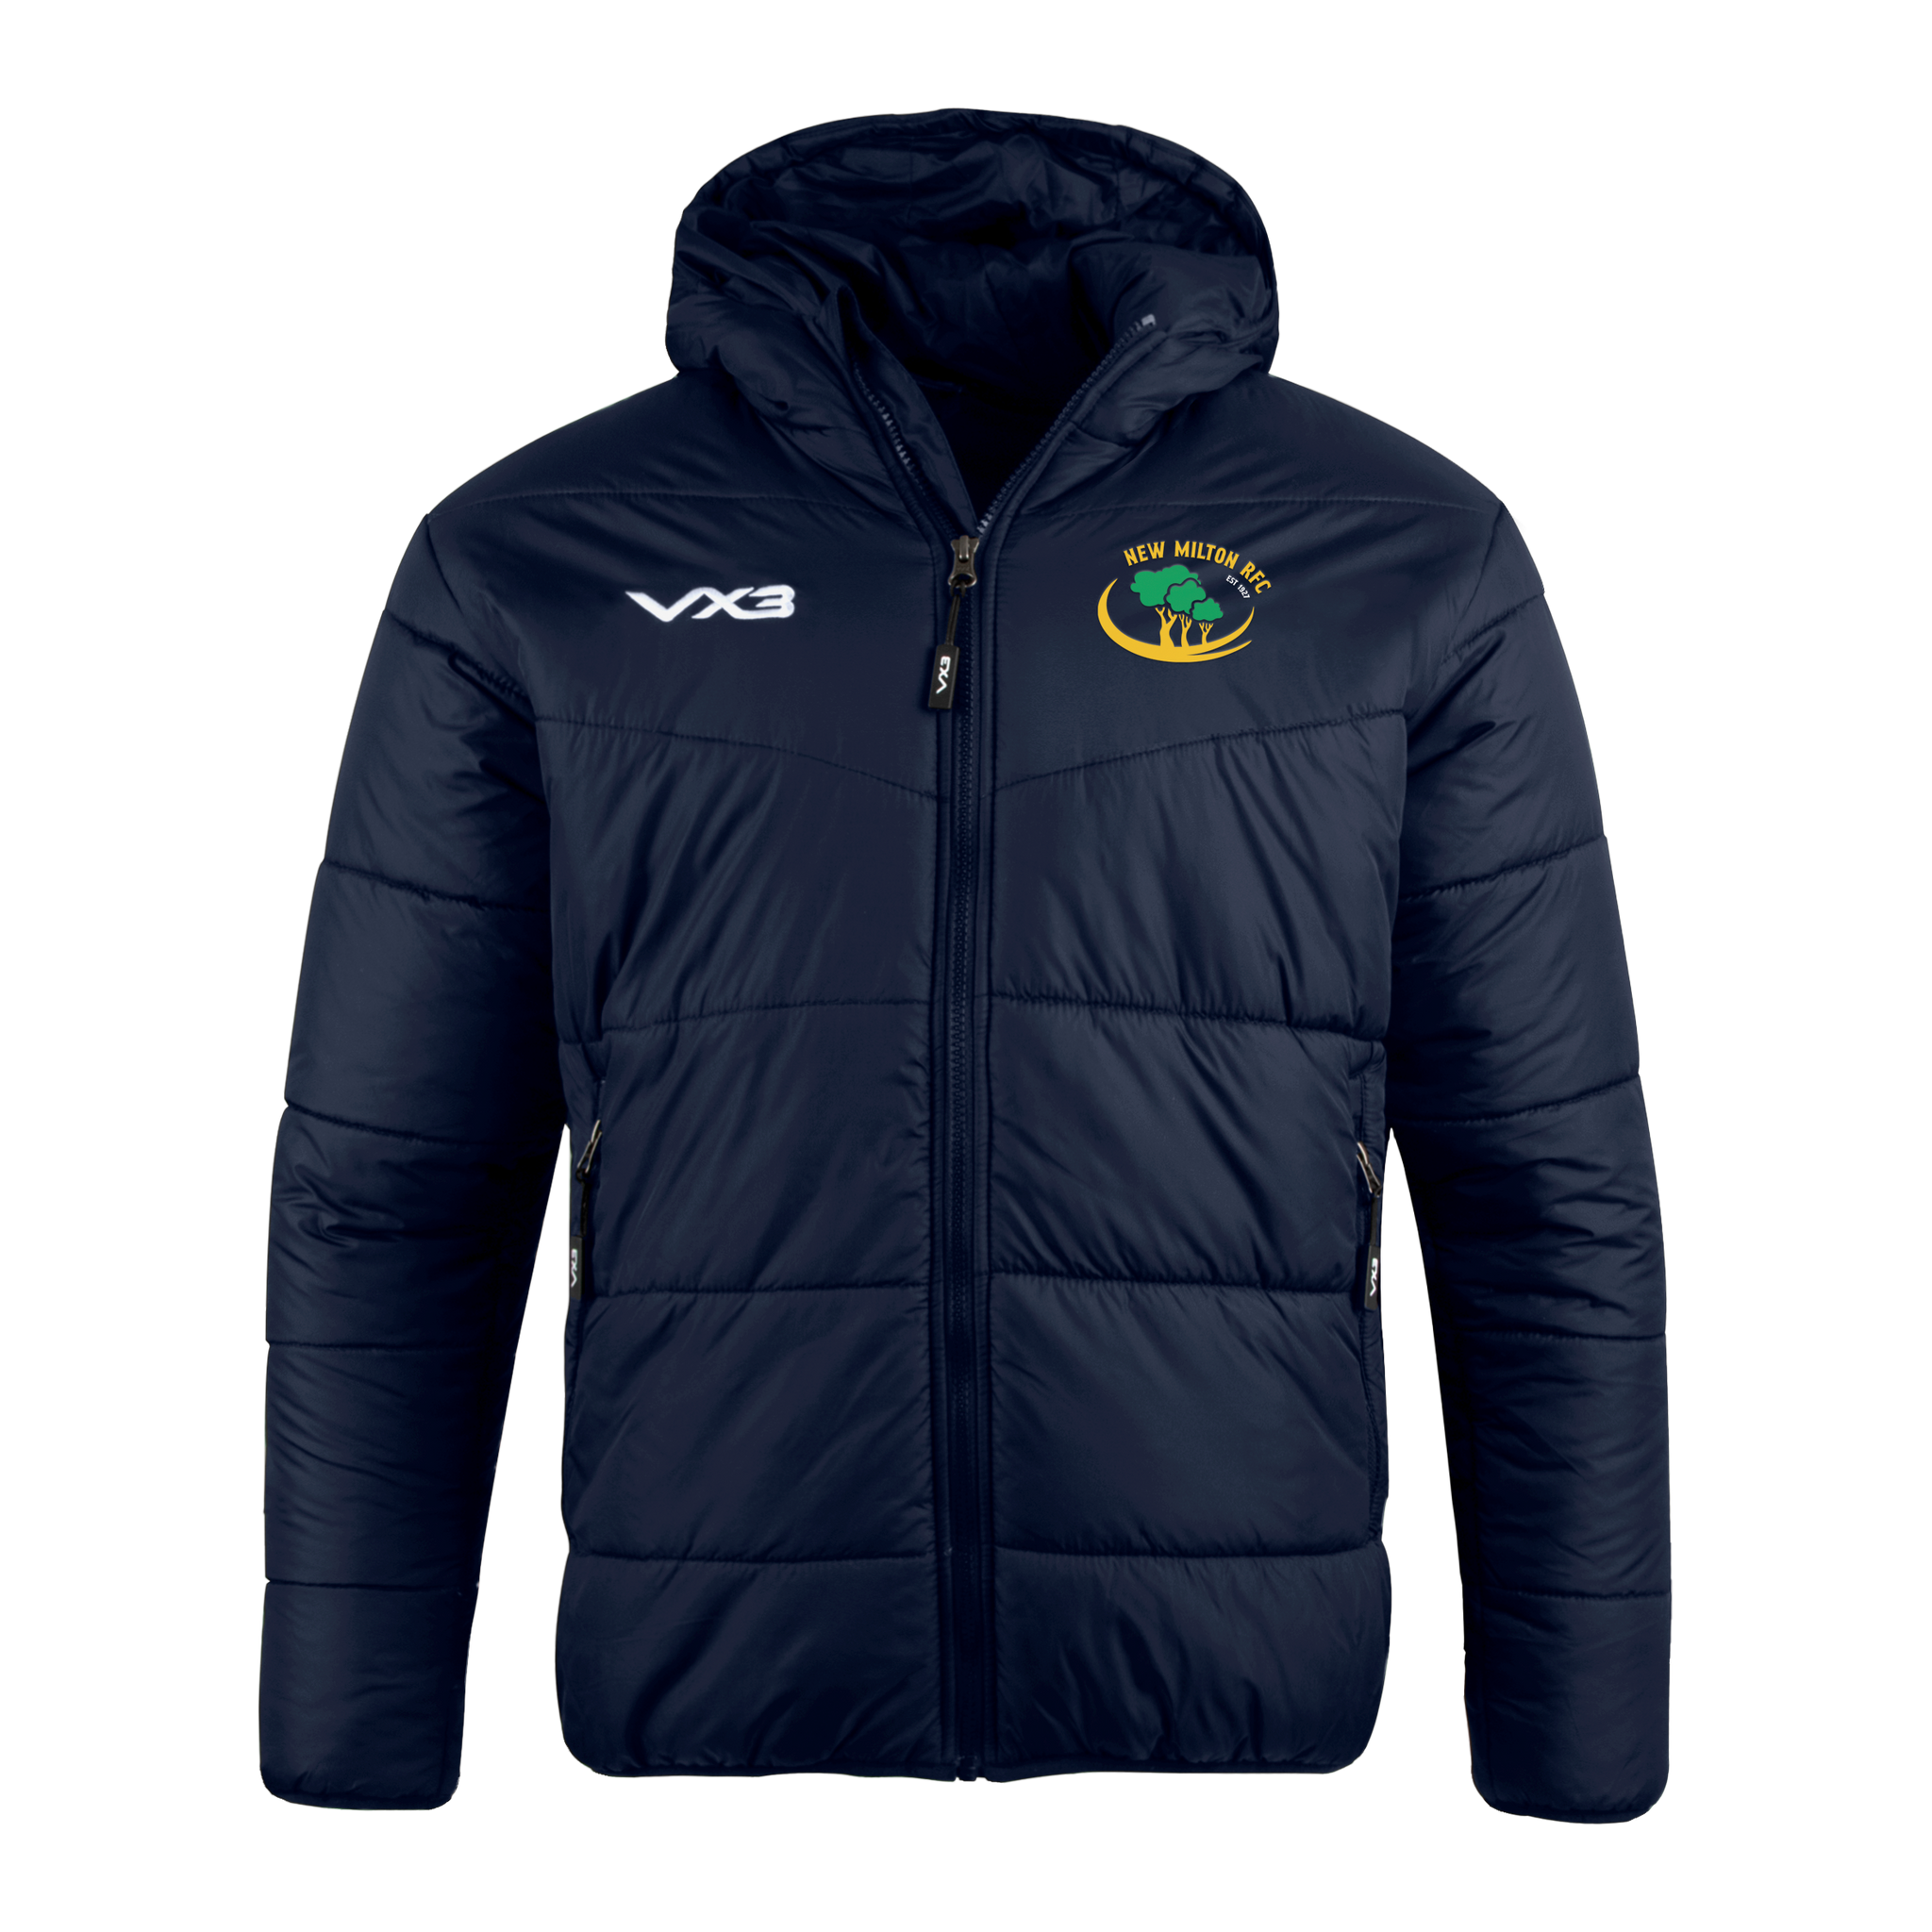 New Milton & District RFC Lorica Youth Quilted Jacket